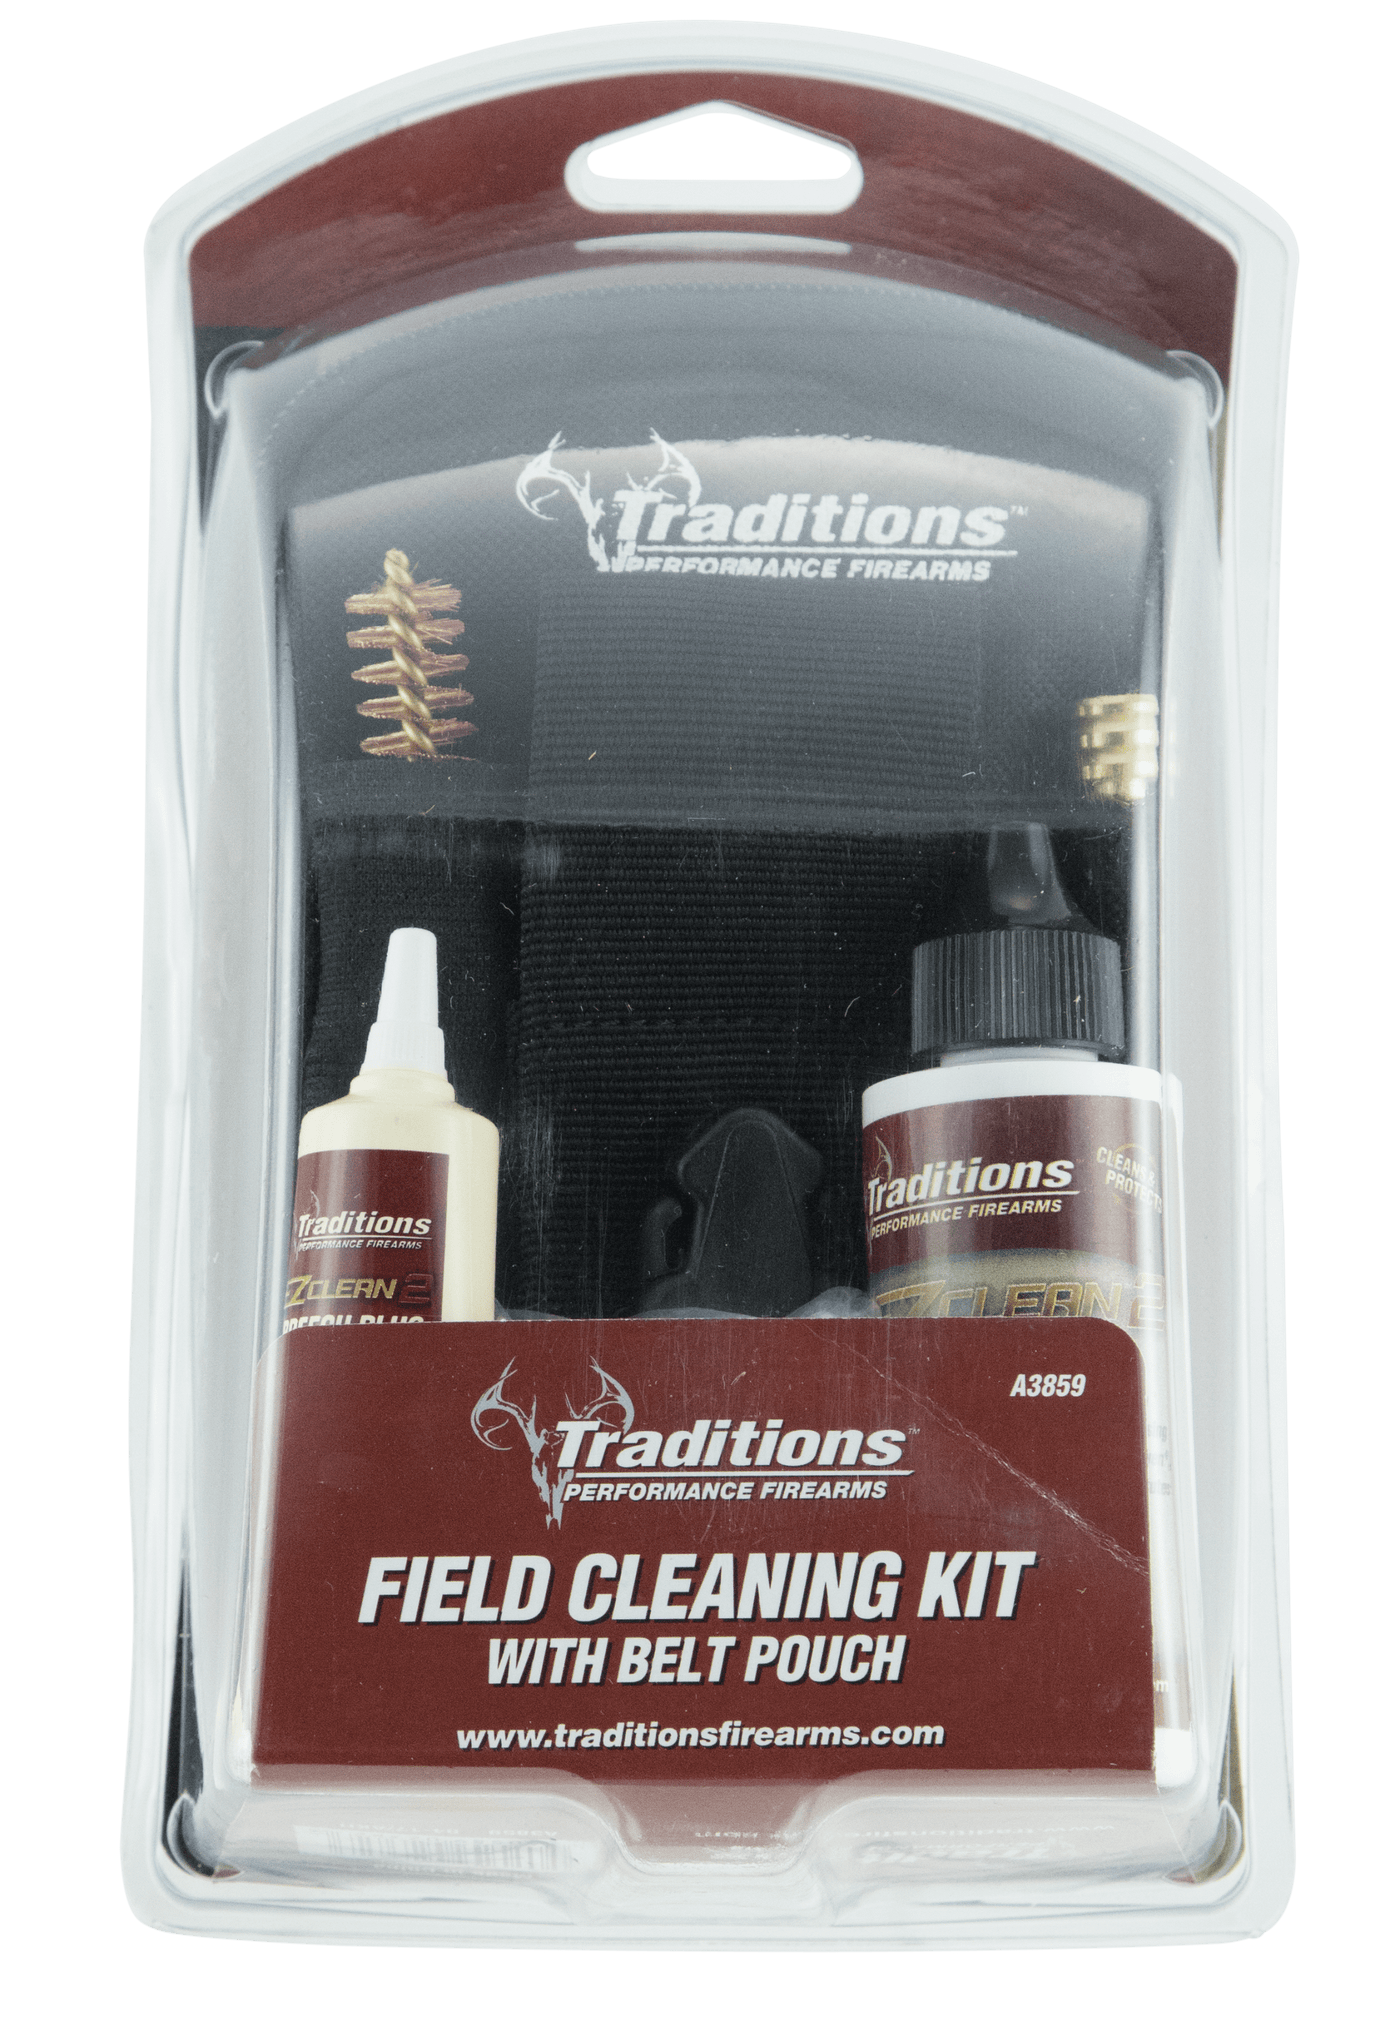 Traditions Traditions Field Cleaning Kit, Trad A3859    Field Cleaning Kit And Belt Pouch Gun Care